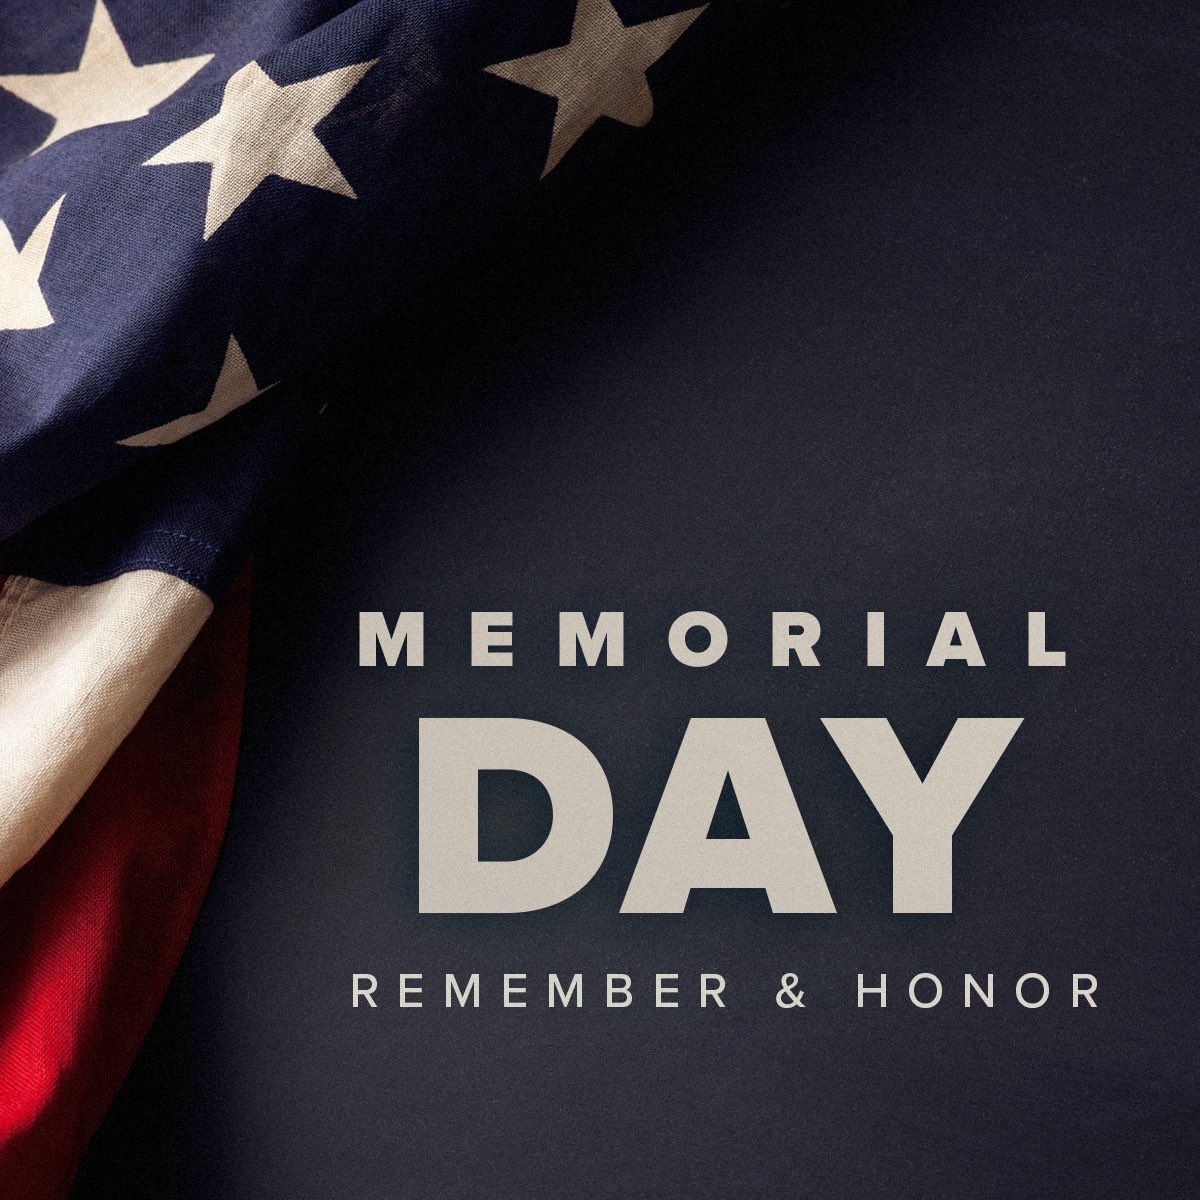 On Memorial Day, we reflect on the profound sacrifices made by our brave servicemembers who fought & died for our country. Honoring our fallen heroes and striving to be worthy of their service & sacrifice is something that unites all Americans.